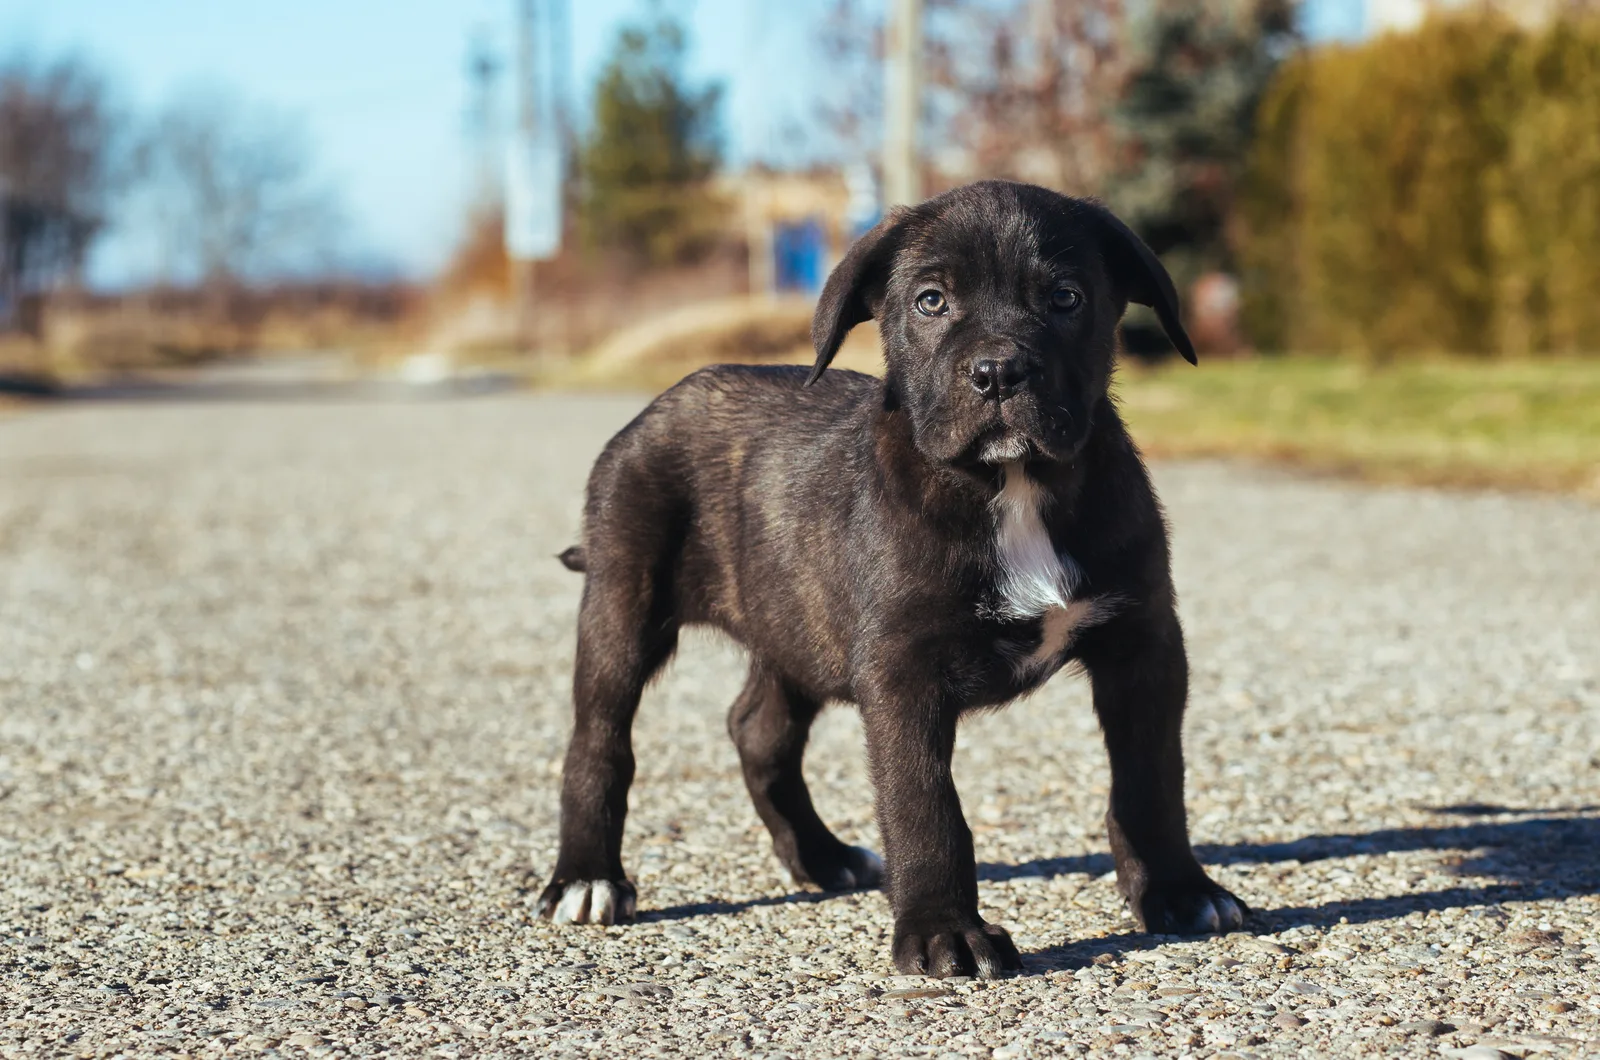 A Cane Corso puppy is standing on the sand